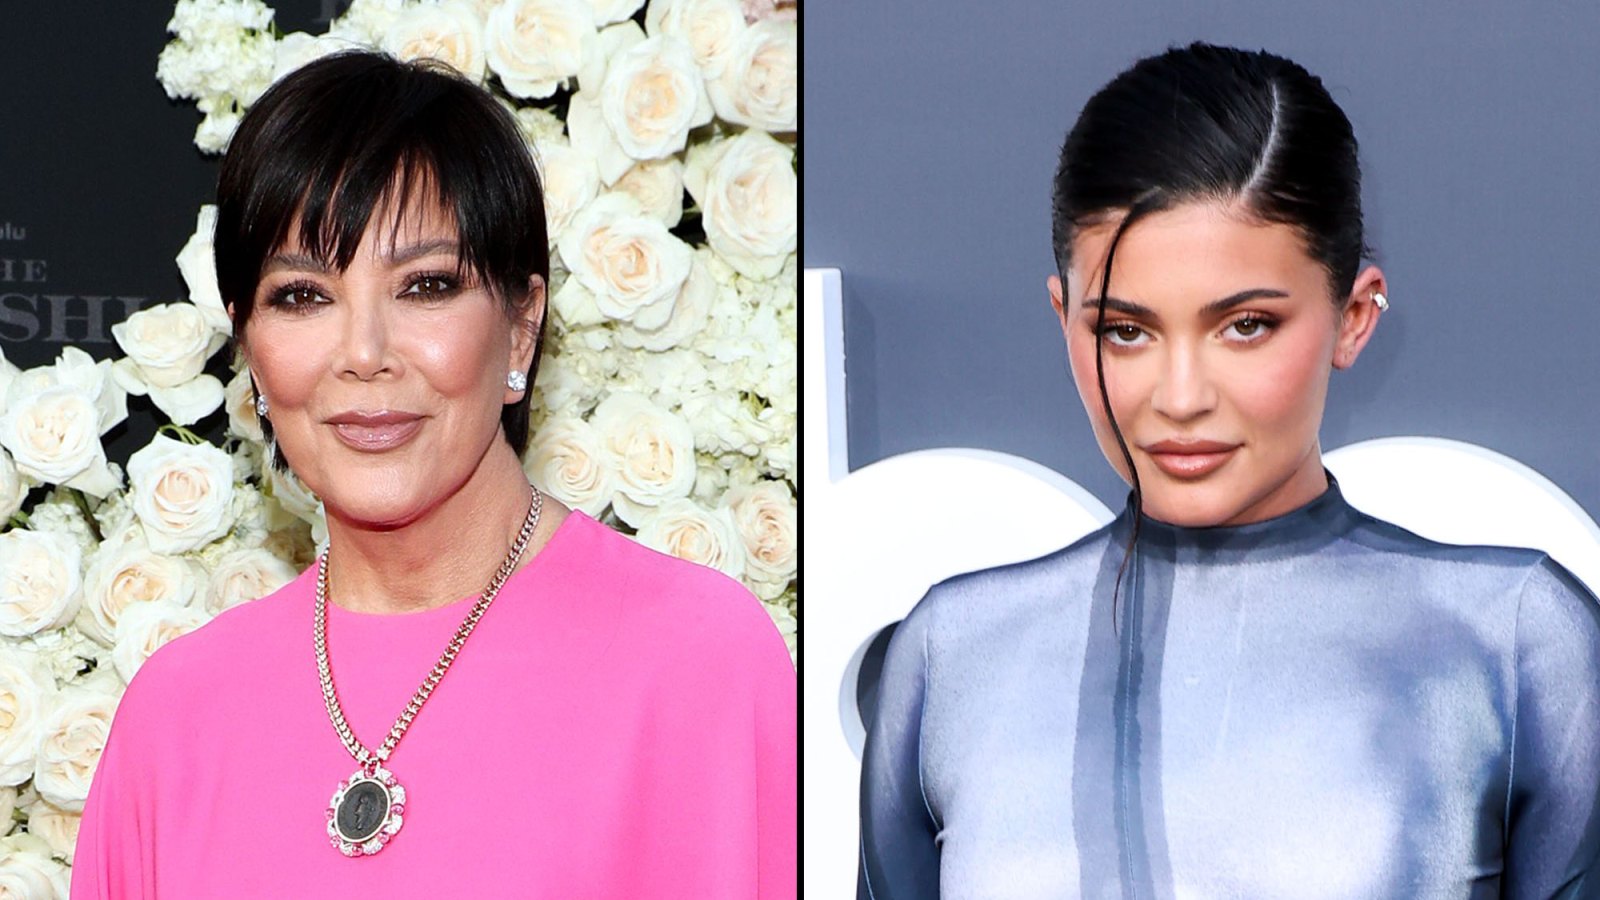 Kris Jenner and Kylie Jenner Look Unbelievably Glamorous as They Take on Viral TikTok Trend